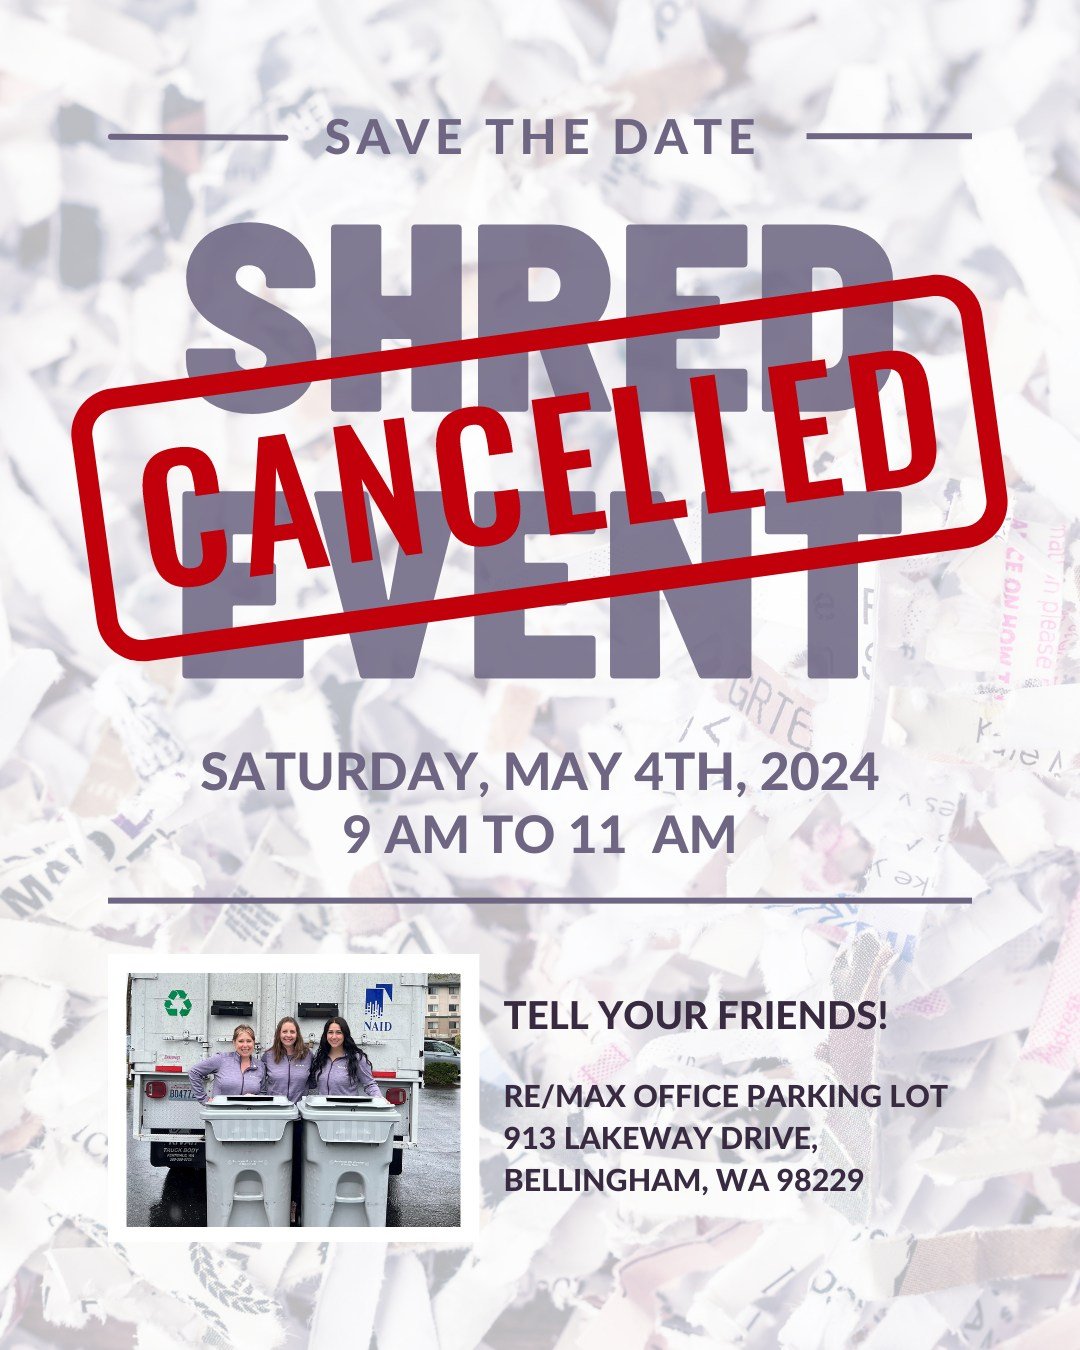 Unfortunately due to unforeseen circumstances, we have to cancel our Shred Event scheduled for this Saturday, May 4th. We are sorry for any inconvenience this may cause and we do hope to continue this annual event in 2025!

If you live in Ferndale, d